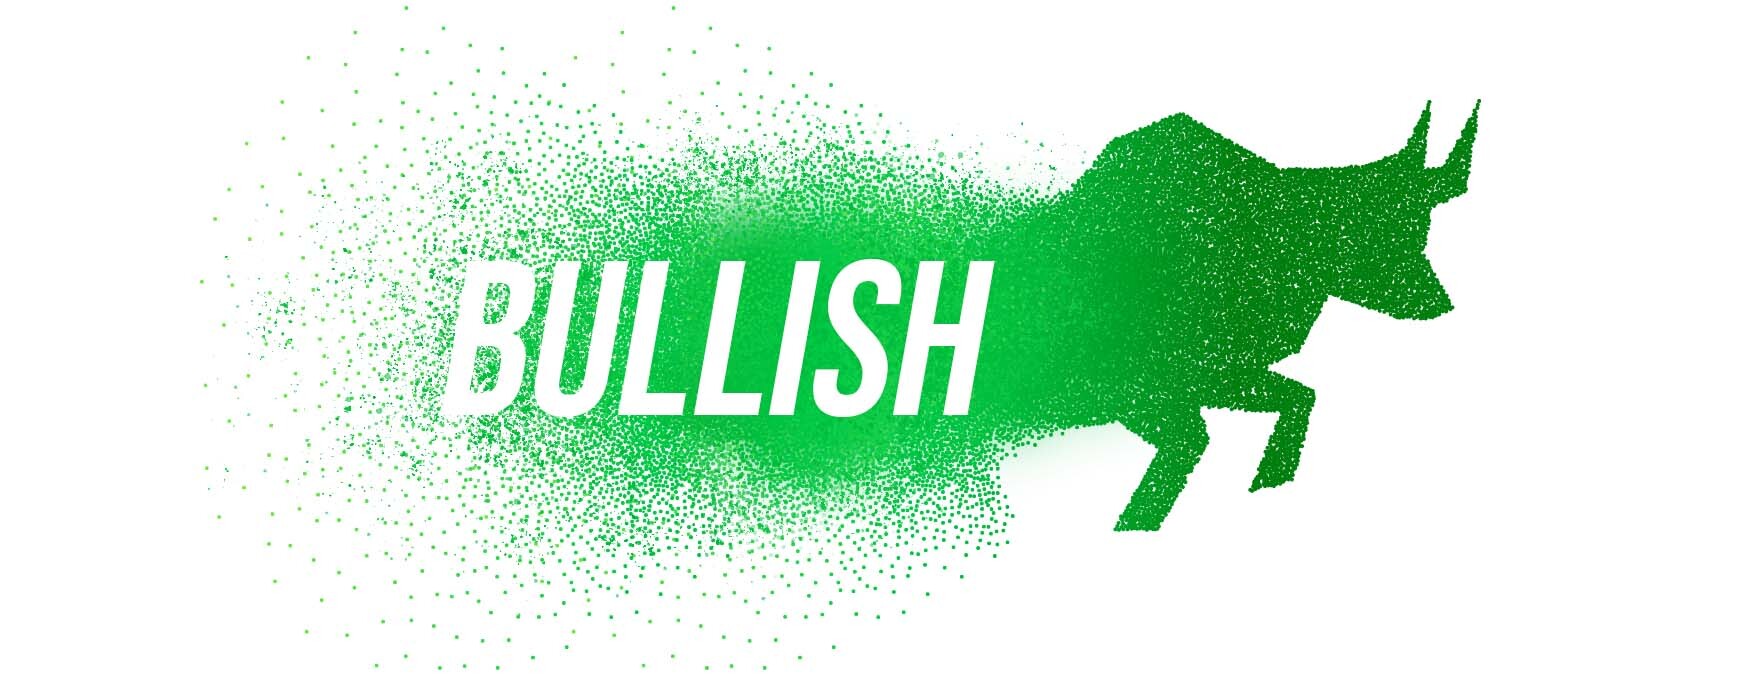 A bull in green glitter runs across a white background, while Bullish is printed between the spreading green glitters.